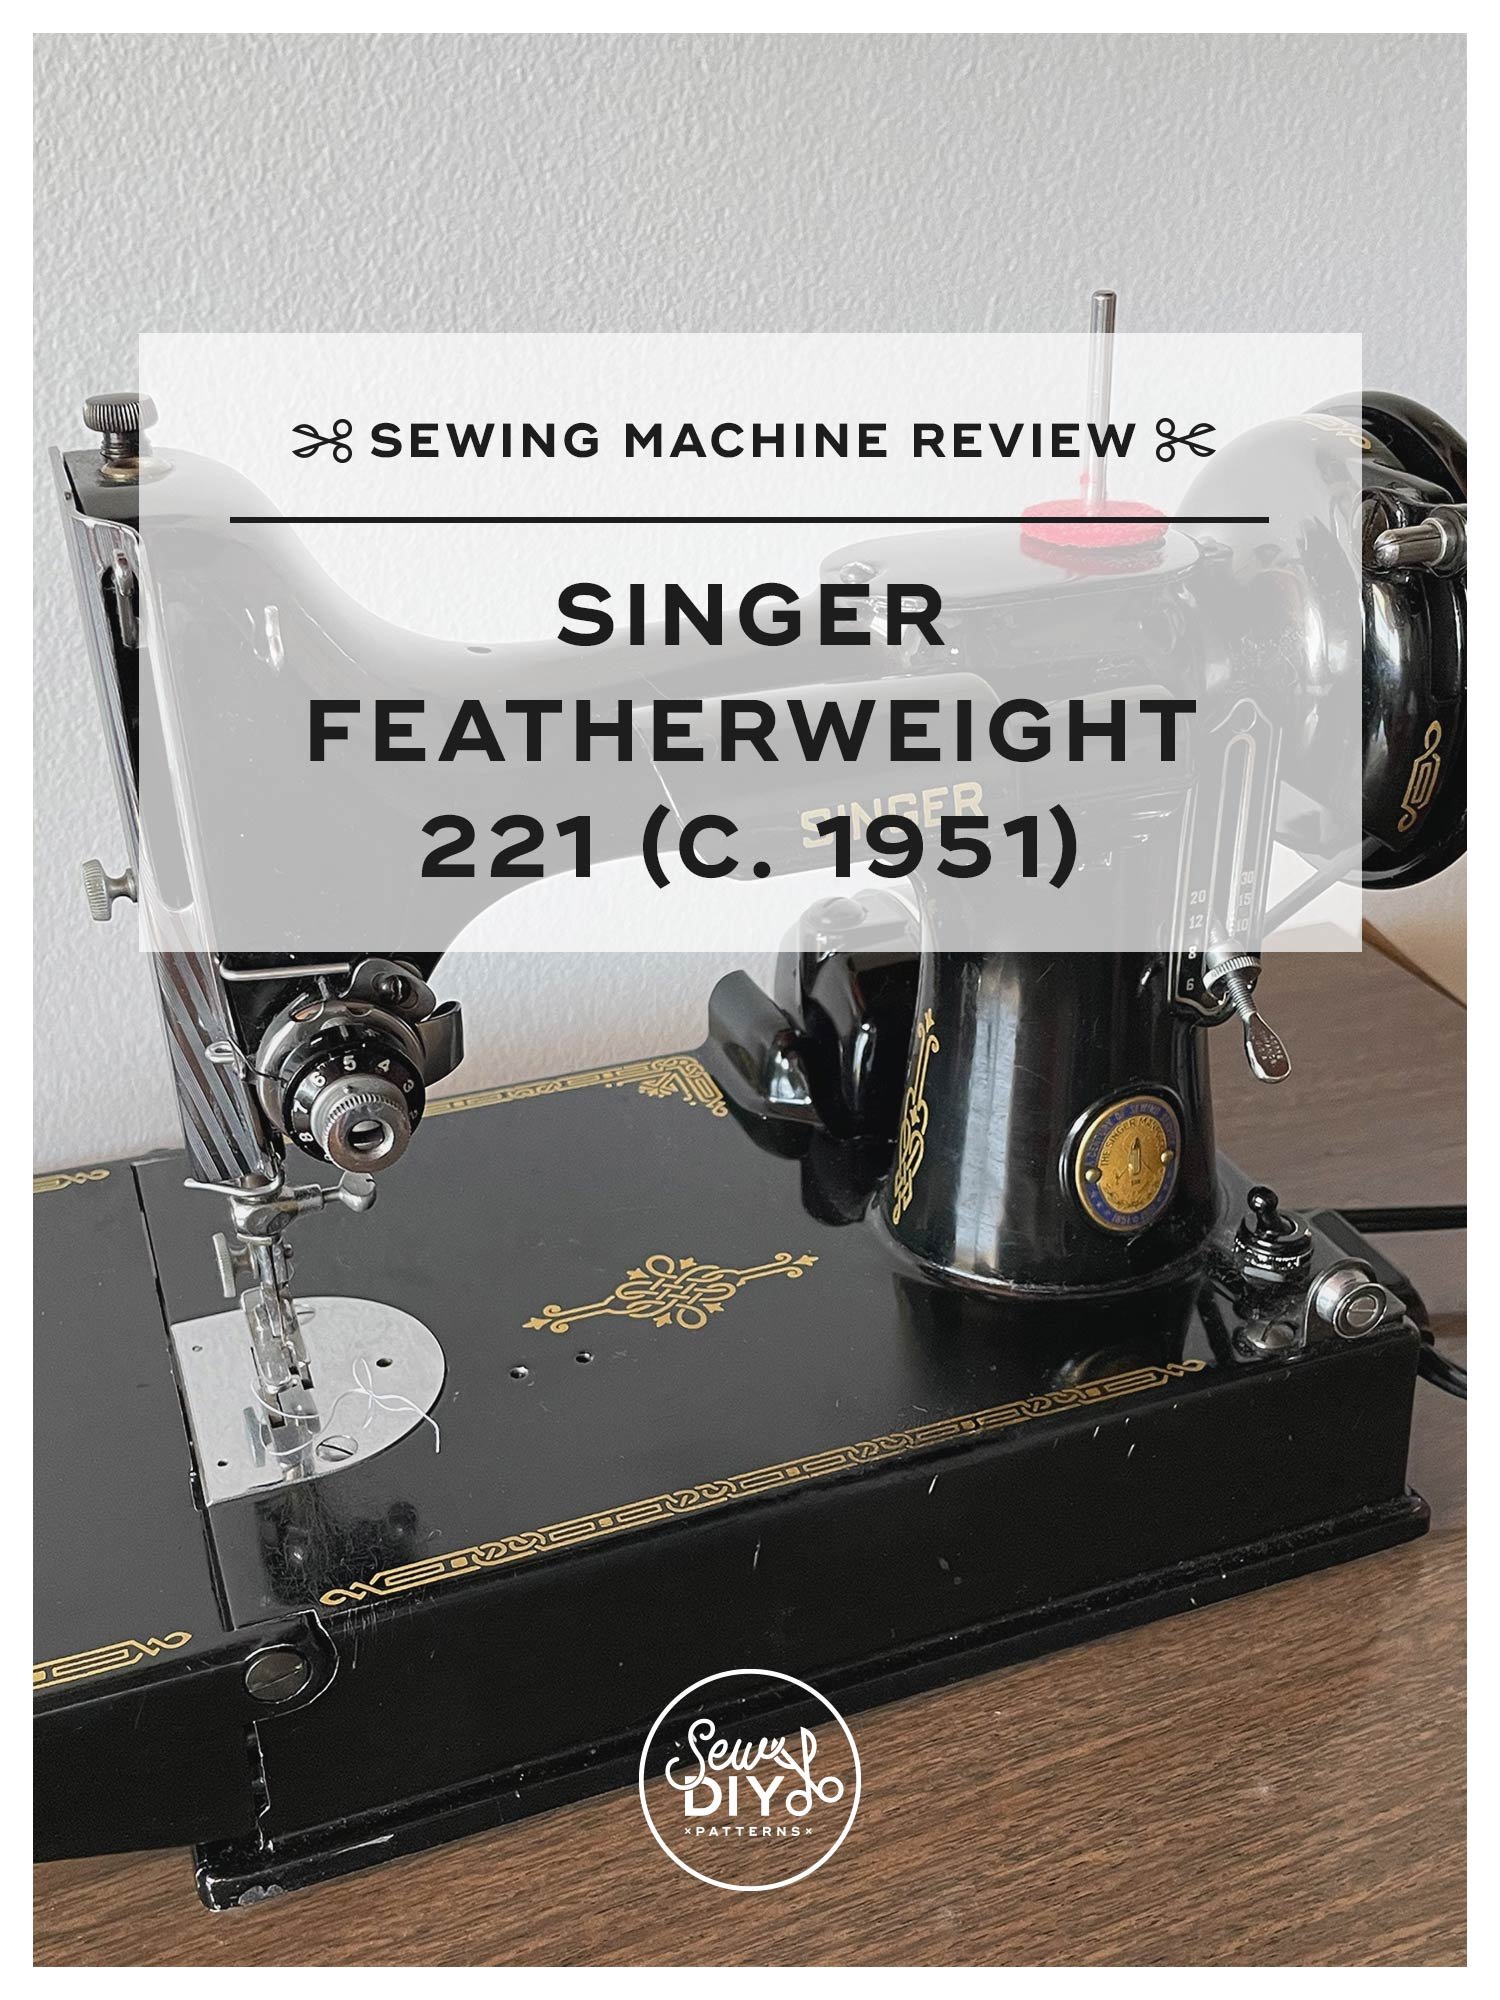 Singer vs. Brother Sewing Machine Review: Which is the Better